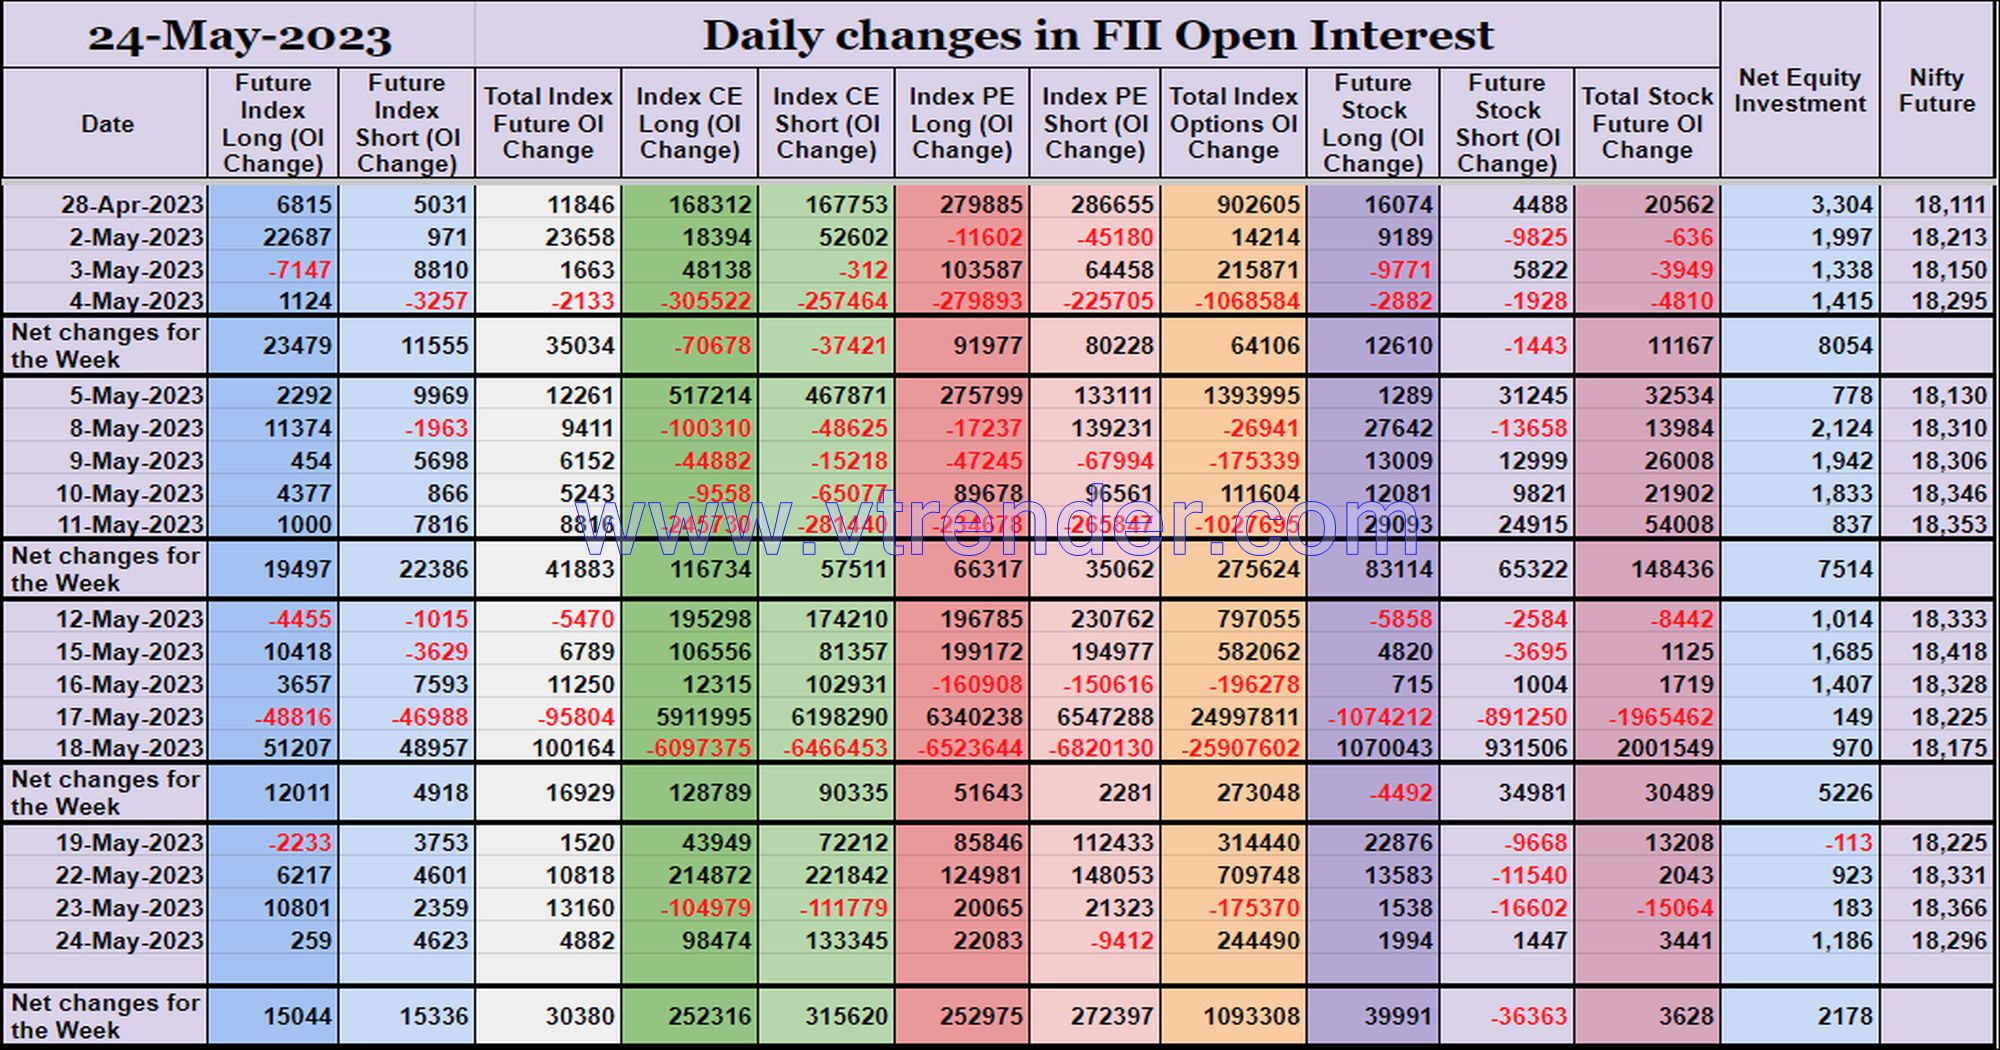 Fiioi24May Participantwise Open Interest (Mid-Week Changes) – 24Th May 2023 Client, Dii, Fii, Open Interest, Participantwise Open Interest, Props